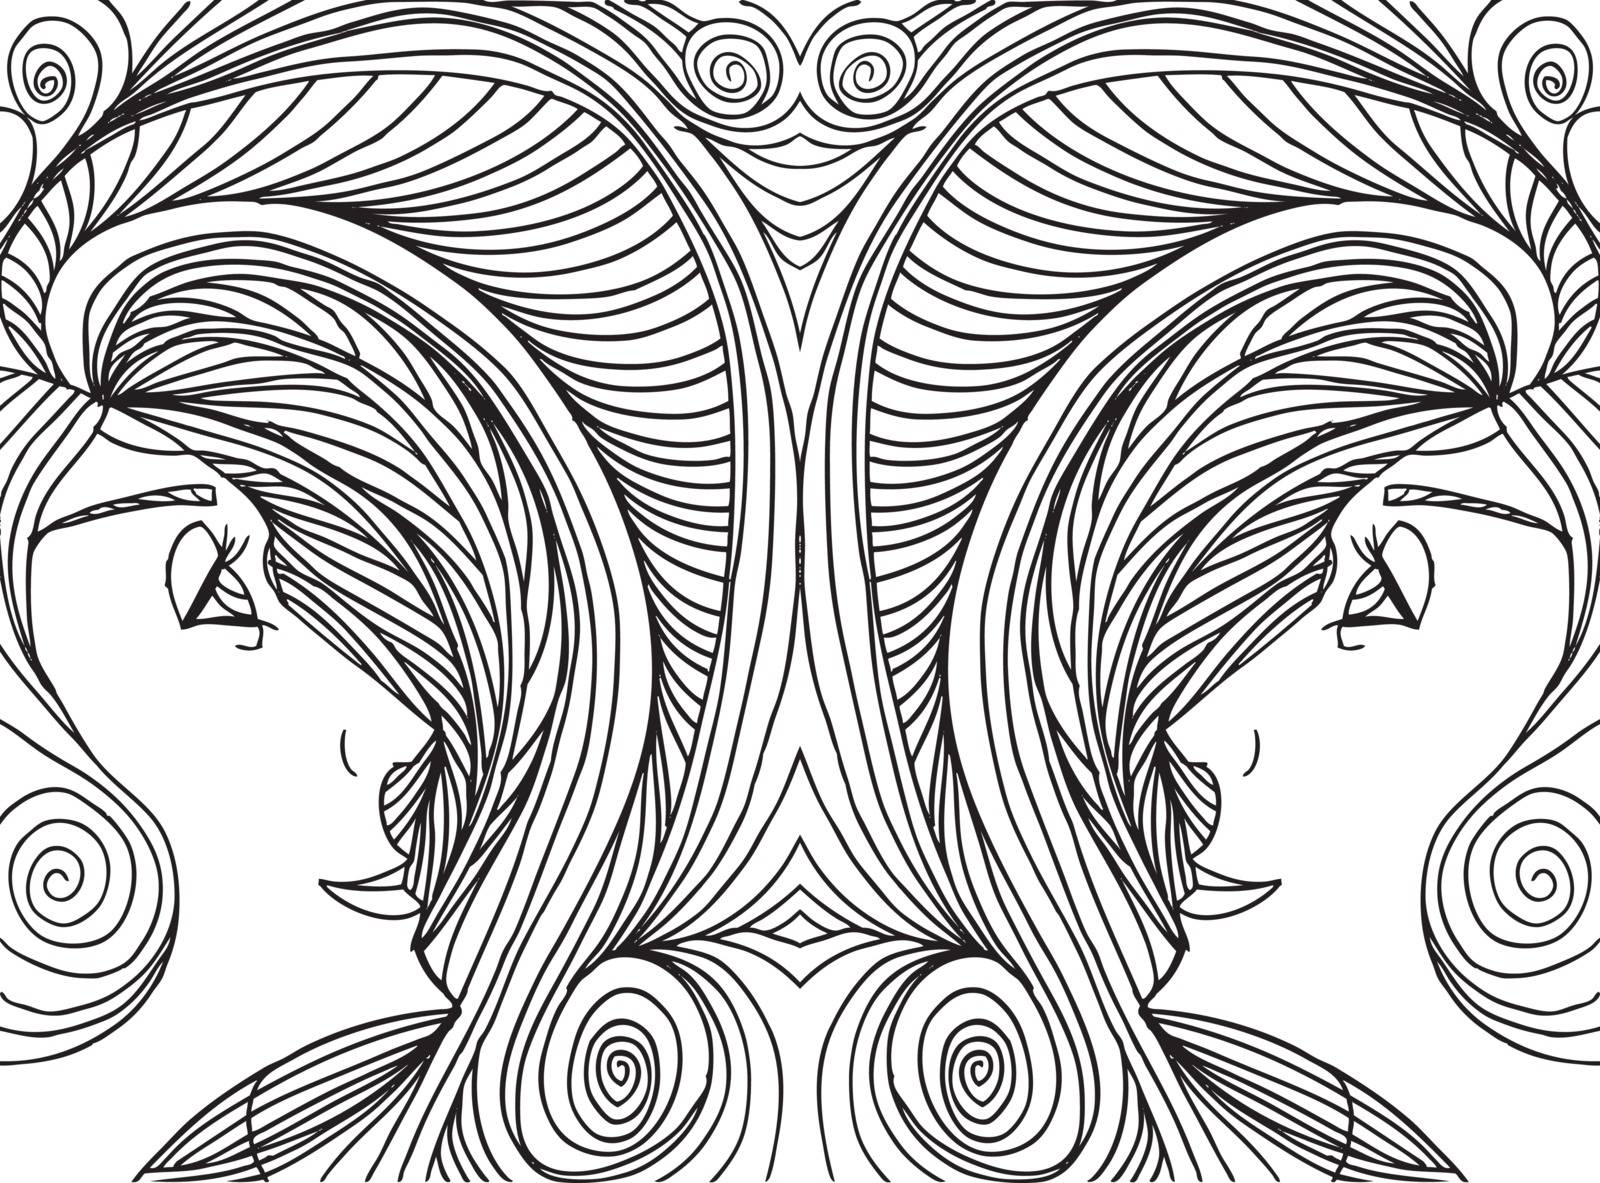 Abstract sketch of woman face. Vector illustration. by aroas